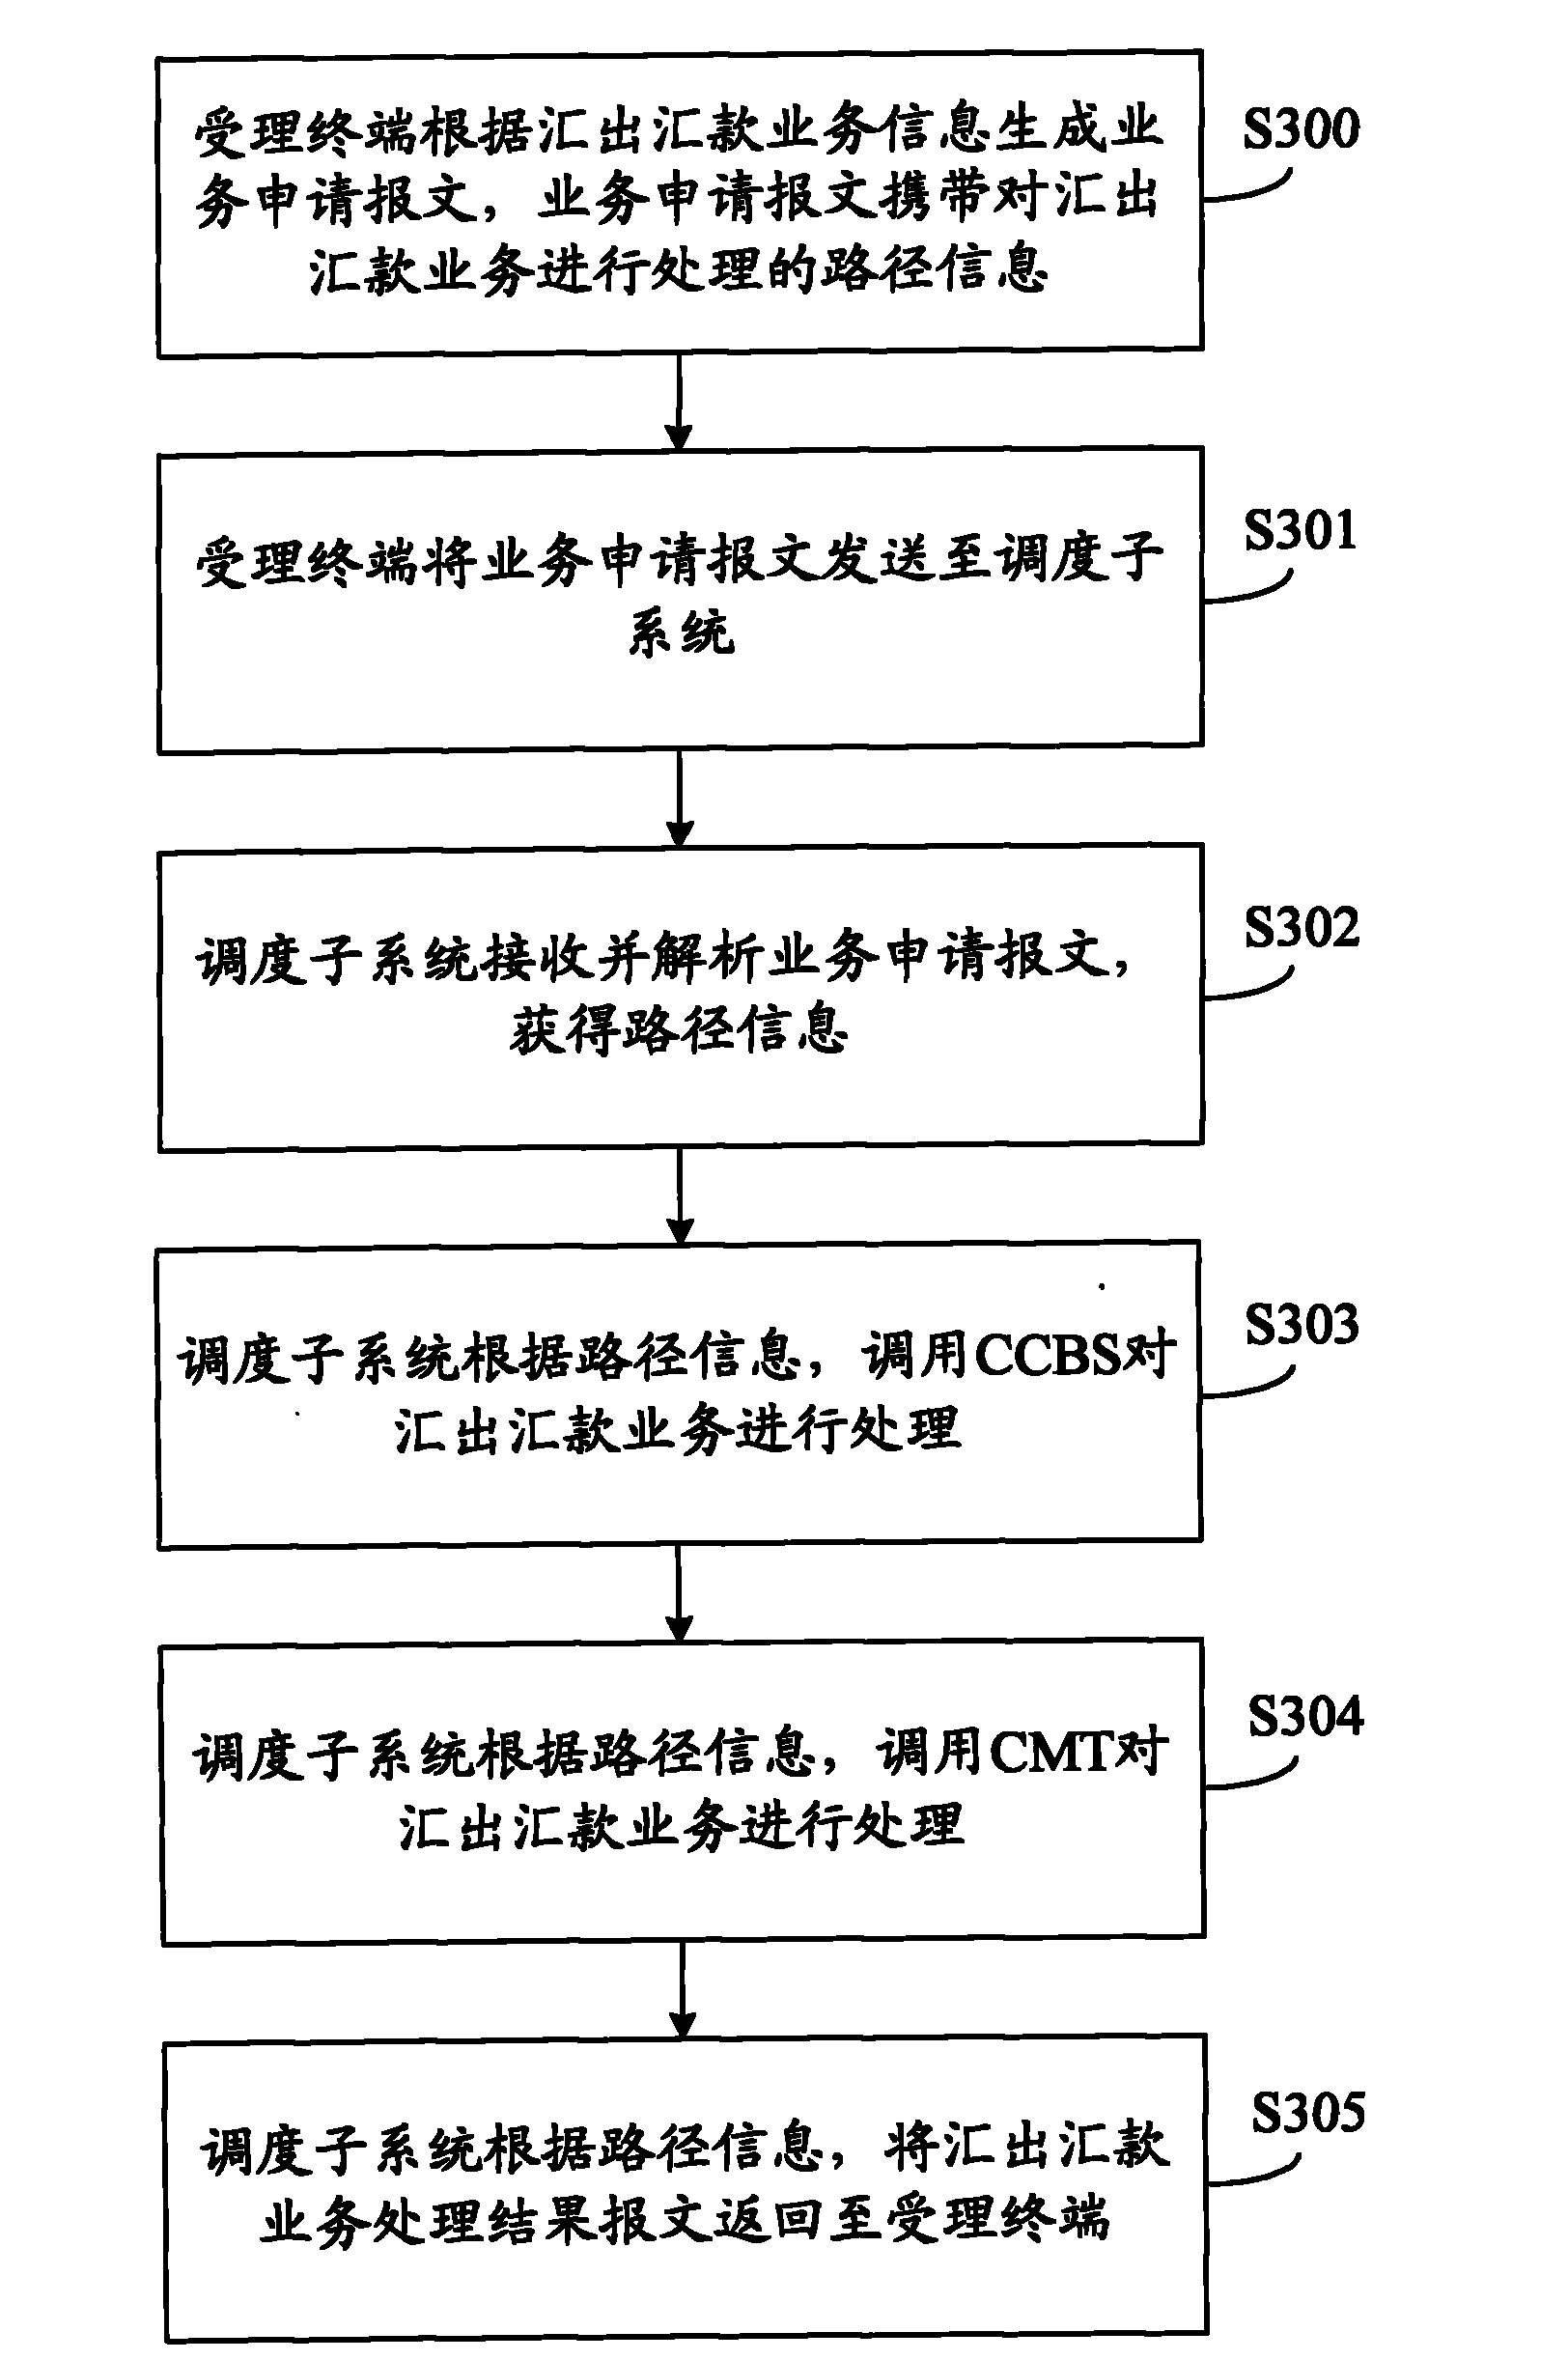 Foreign exchange remittance service processing method and system